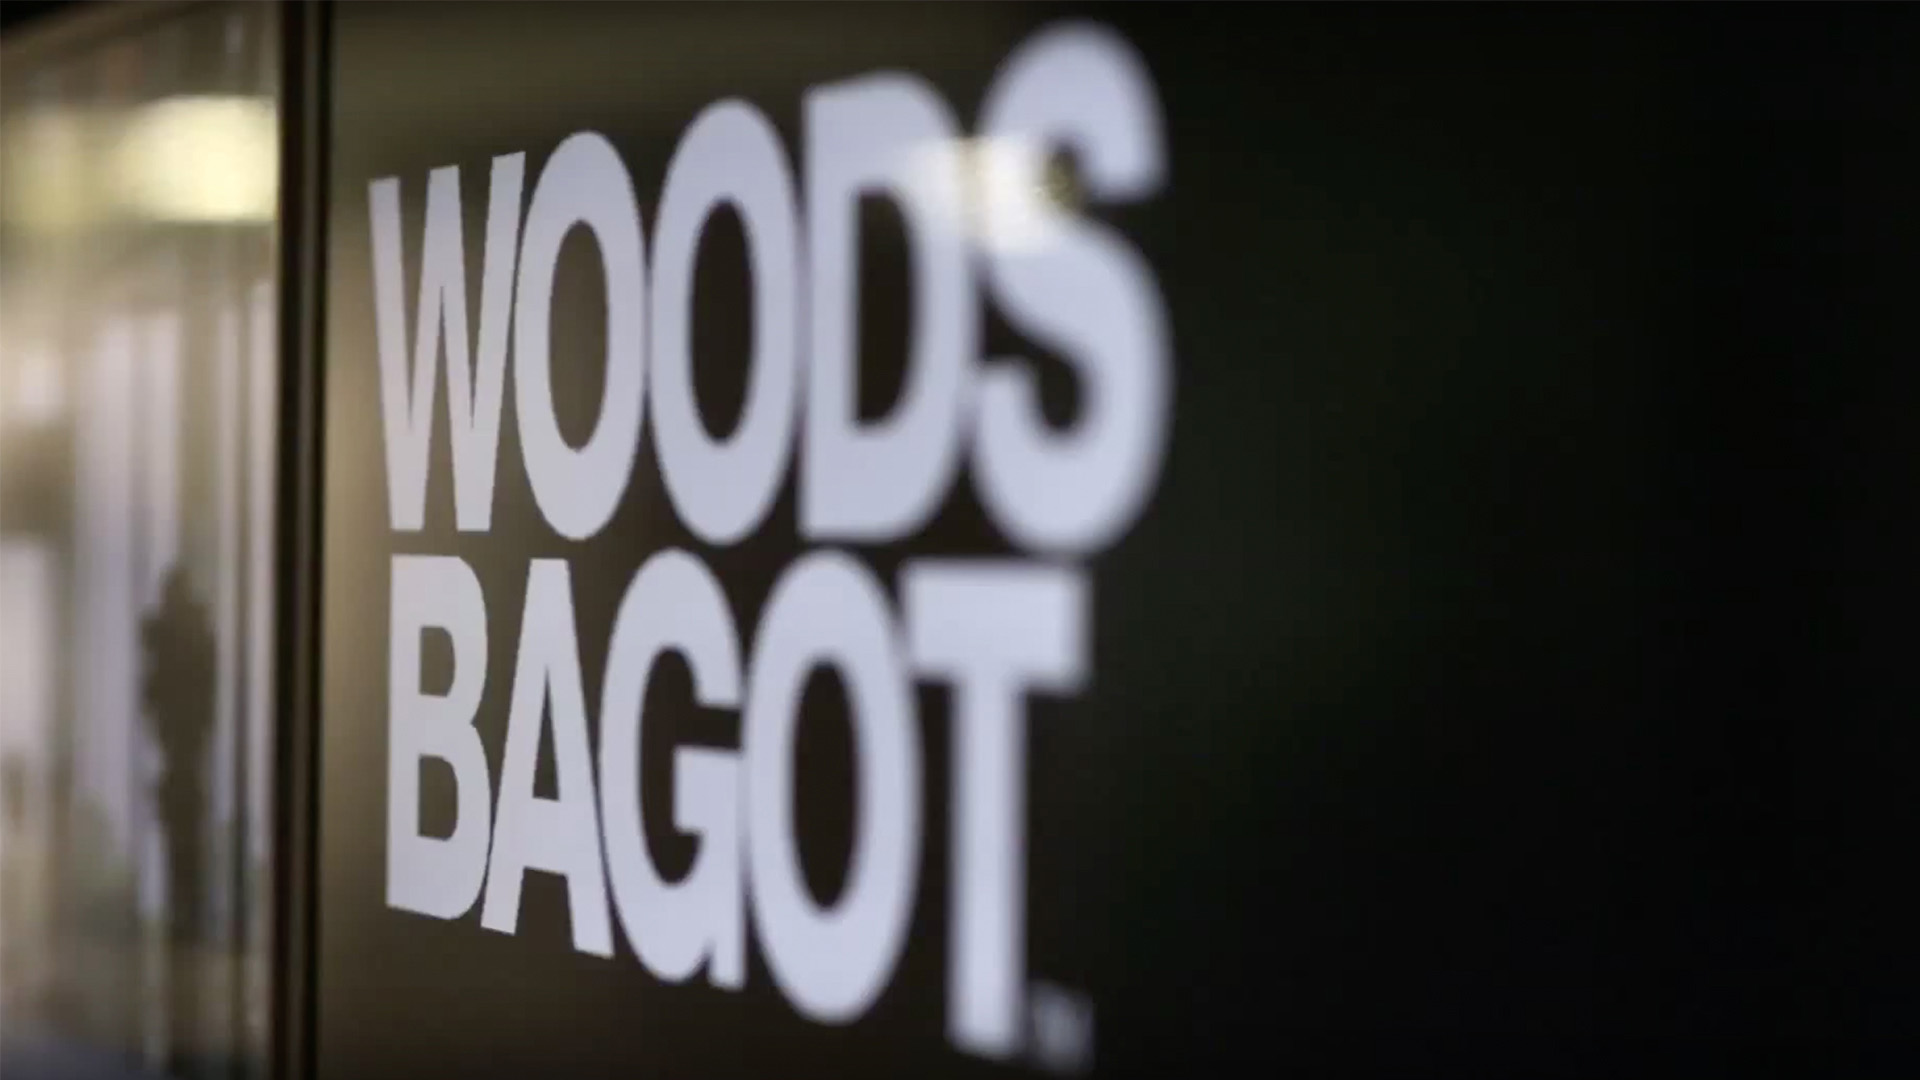 The production of the corporate video for woods bagot by D2 Studio Marketing Agency and Branding Agency Hong Kong and Guangzhou China who provide production of corporate videos 4